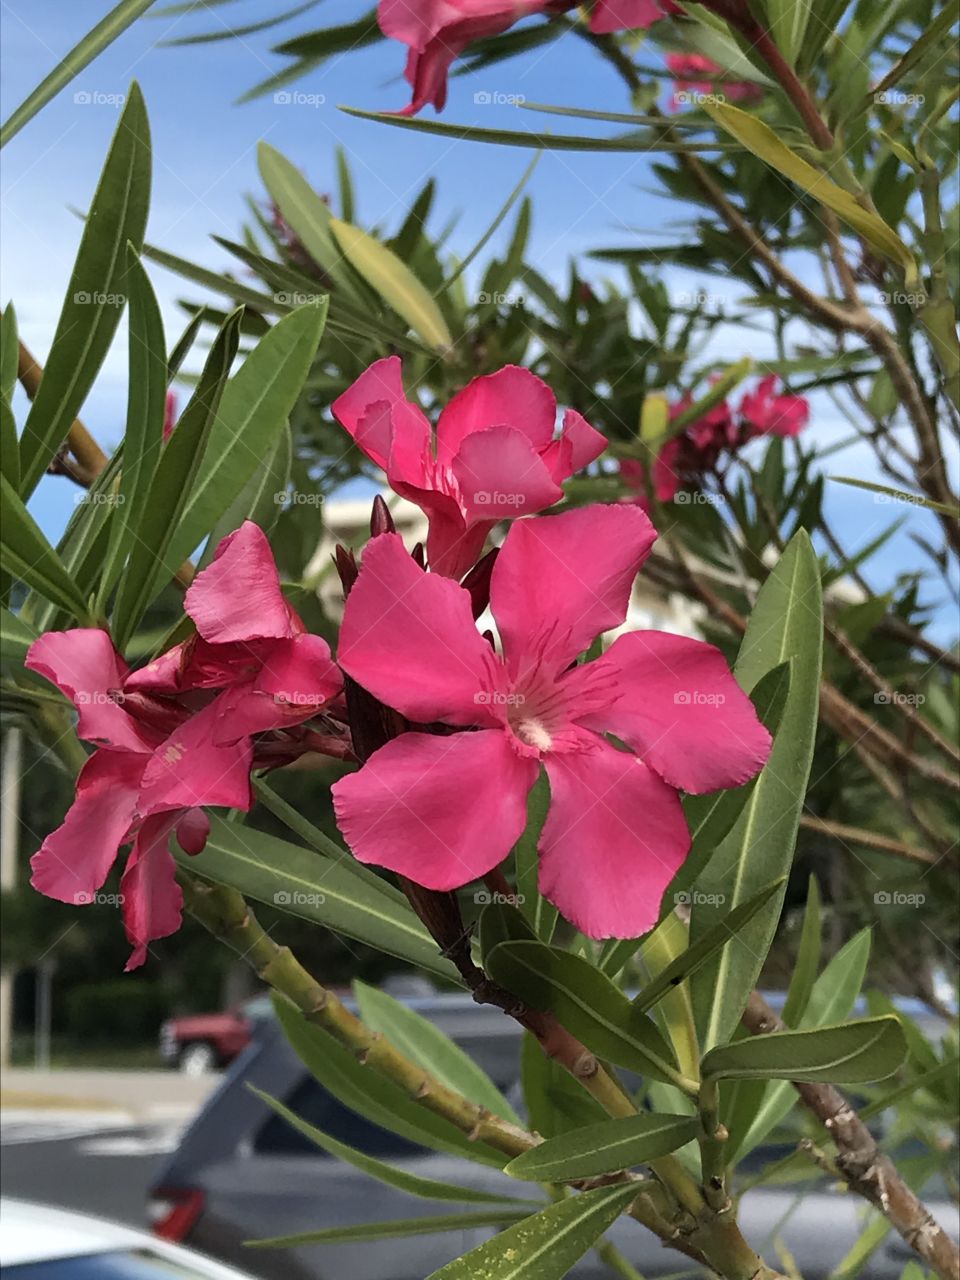 Bright bushes of Florida’s parking lots.